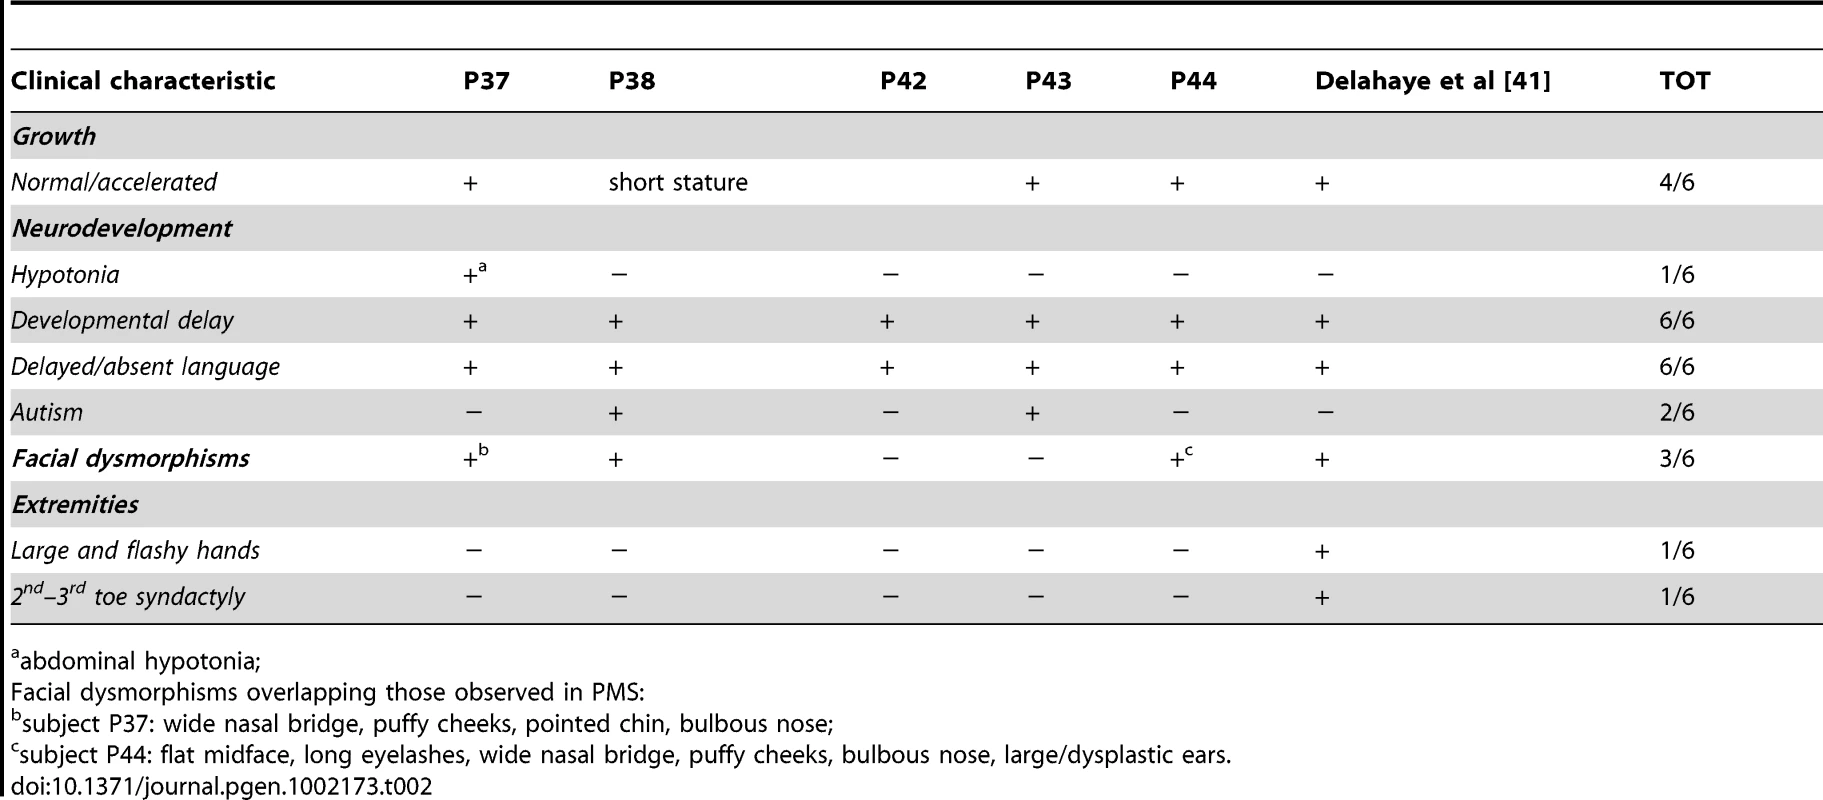 Clinical characteristic of PMS in subjects with interstitial 22q13 microdeletions.